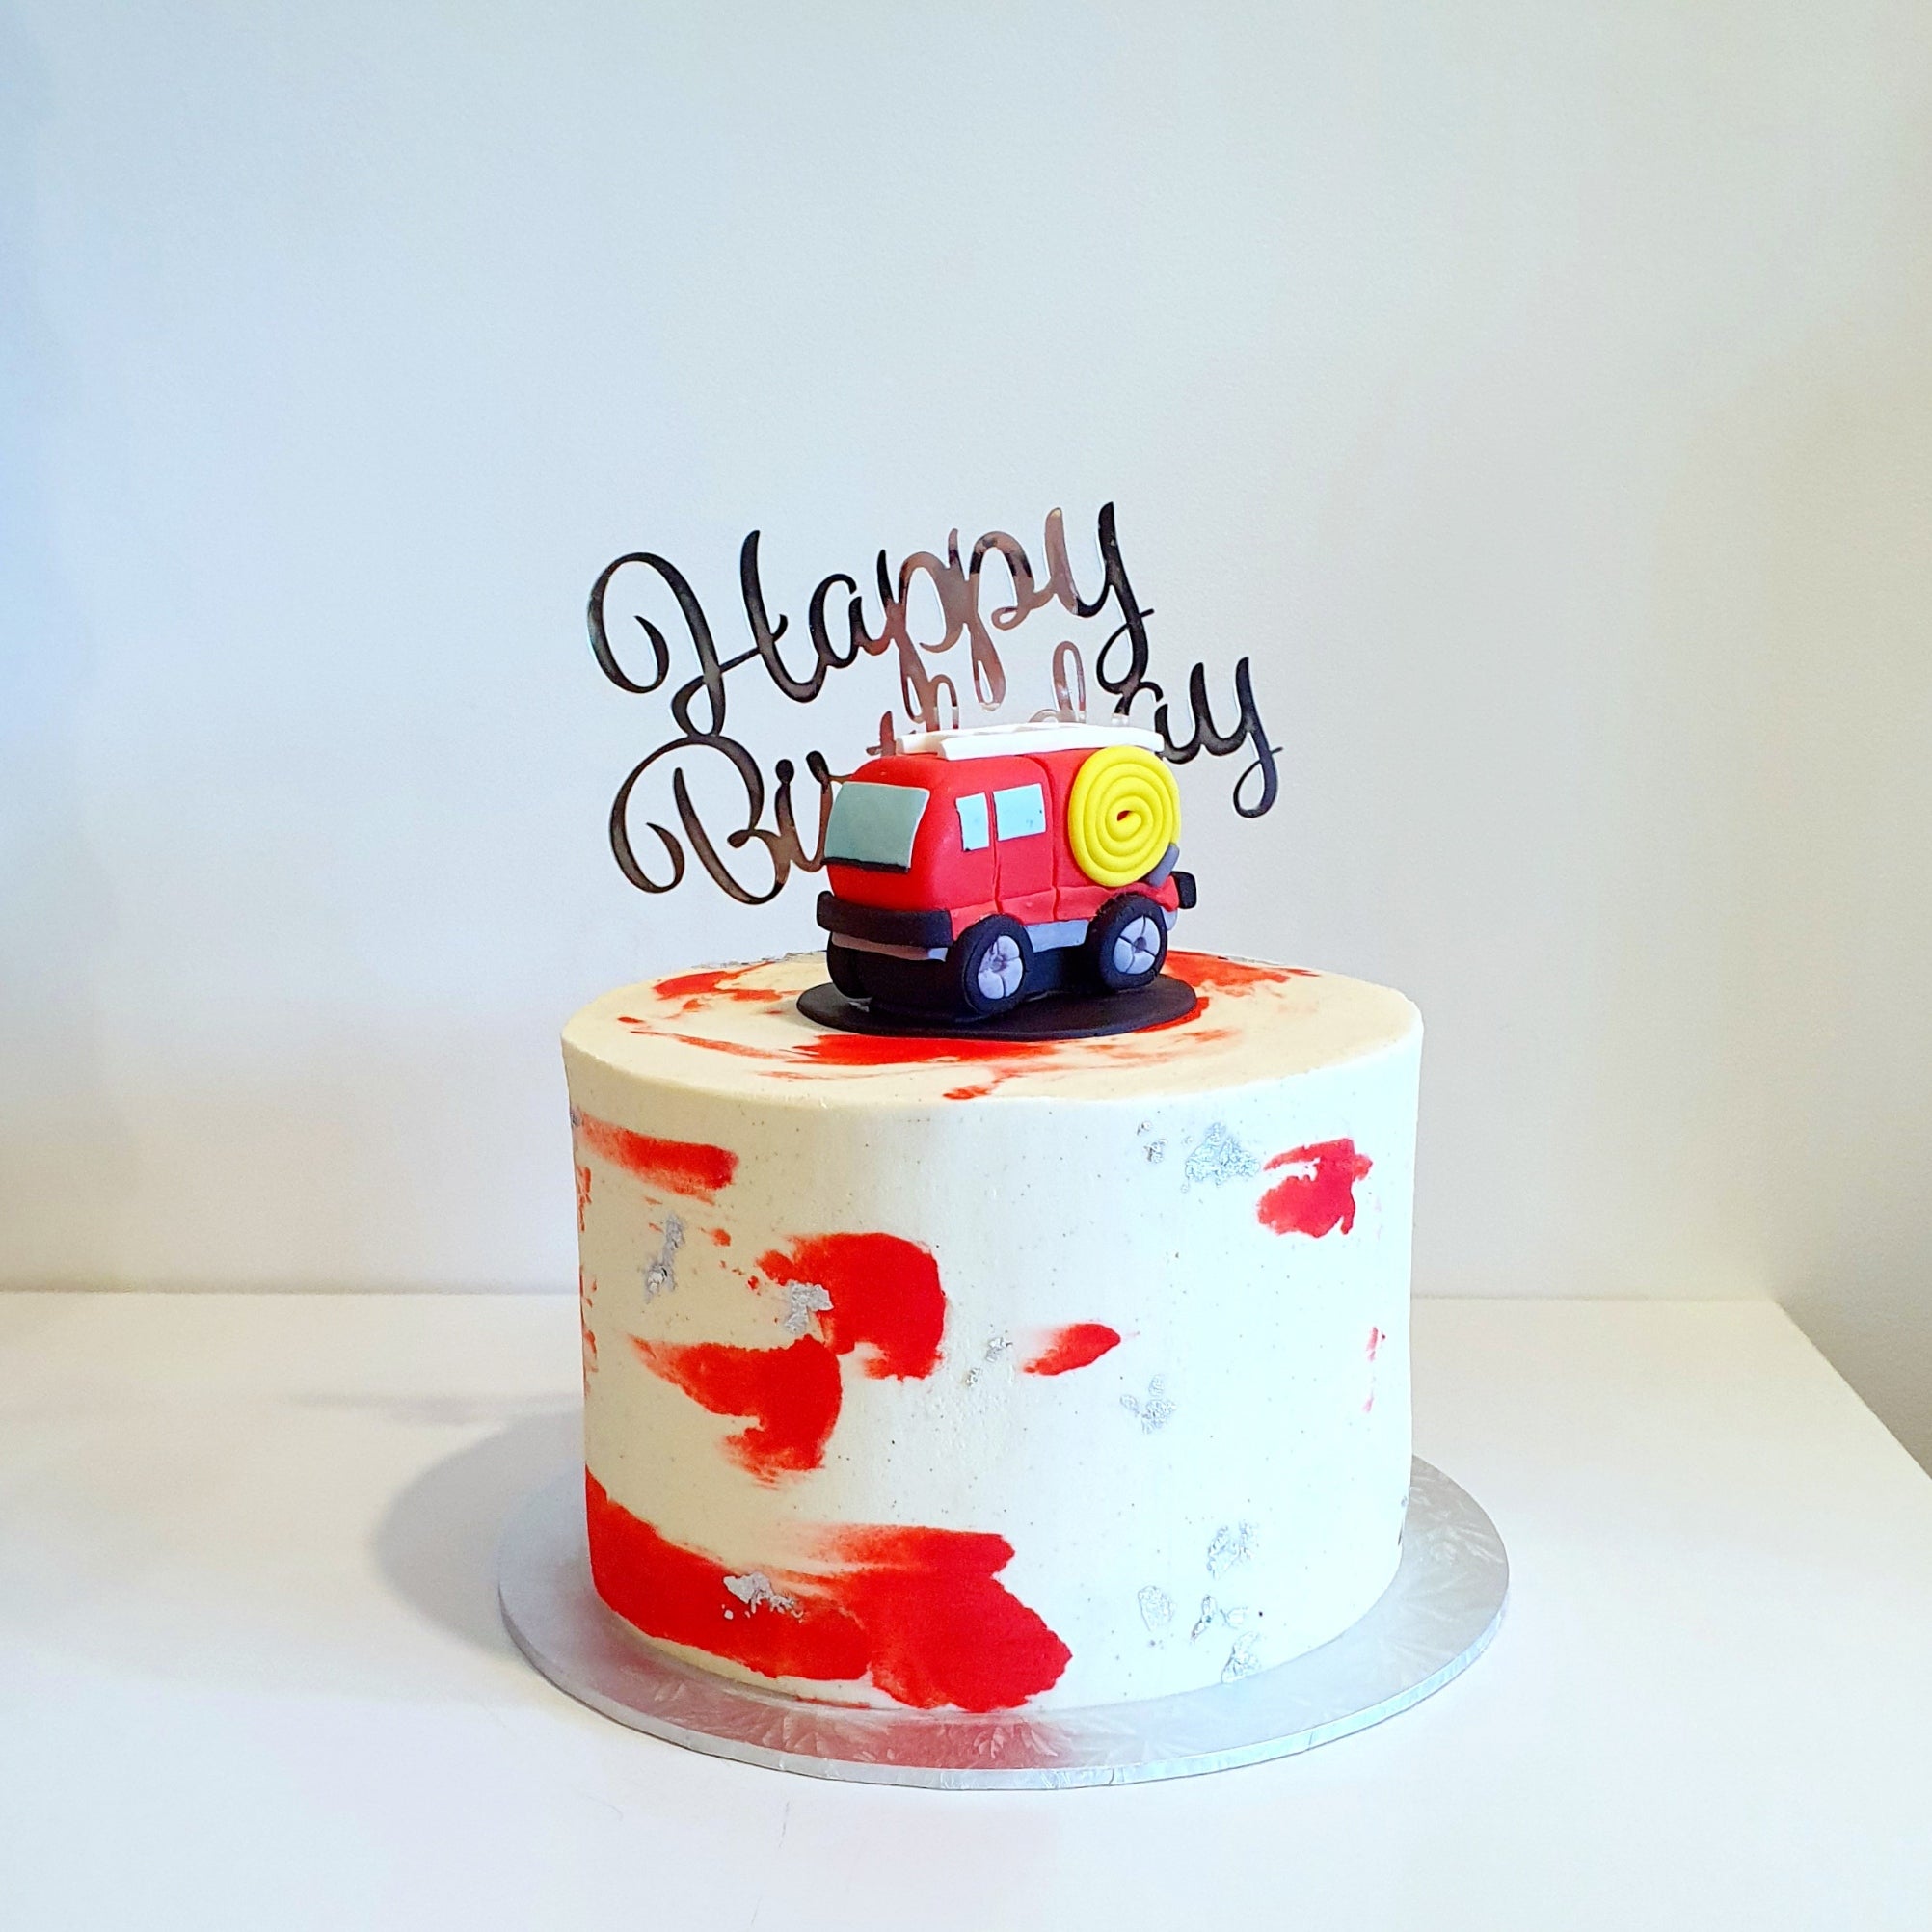 15 Monster Truck Cake Ideas For Kids' Birthdays - Mouths of Mums